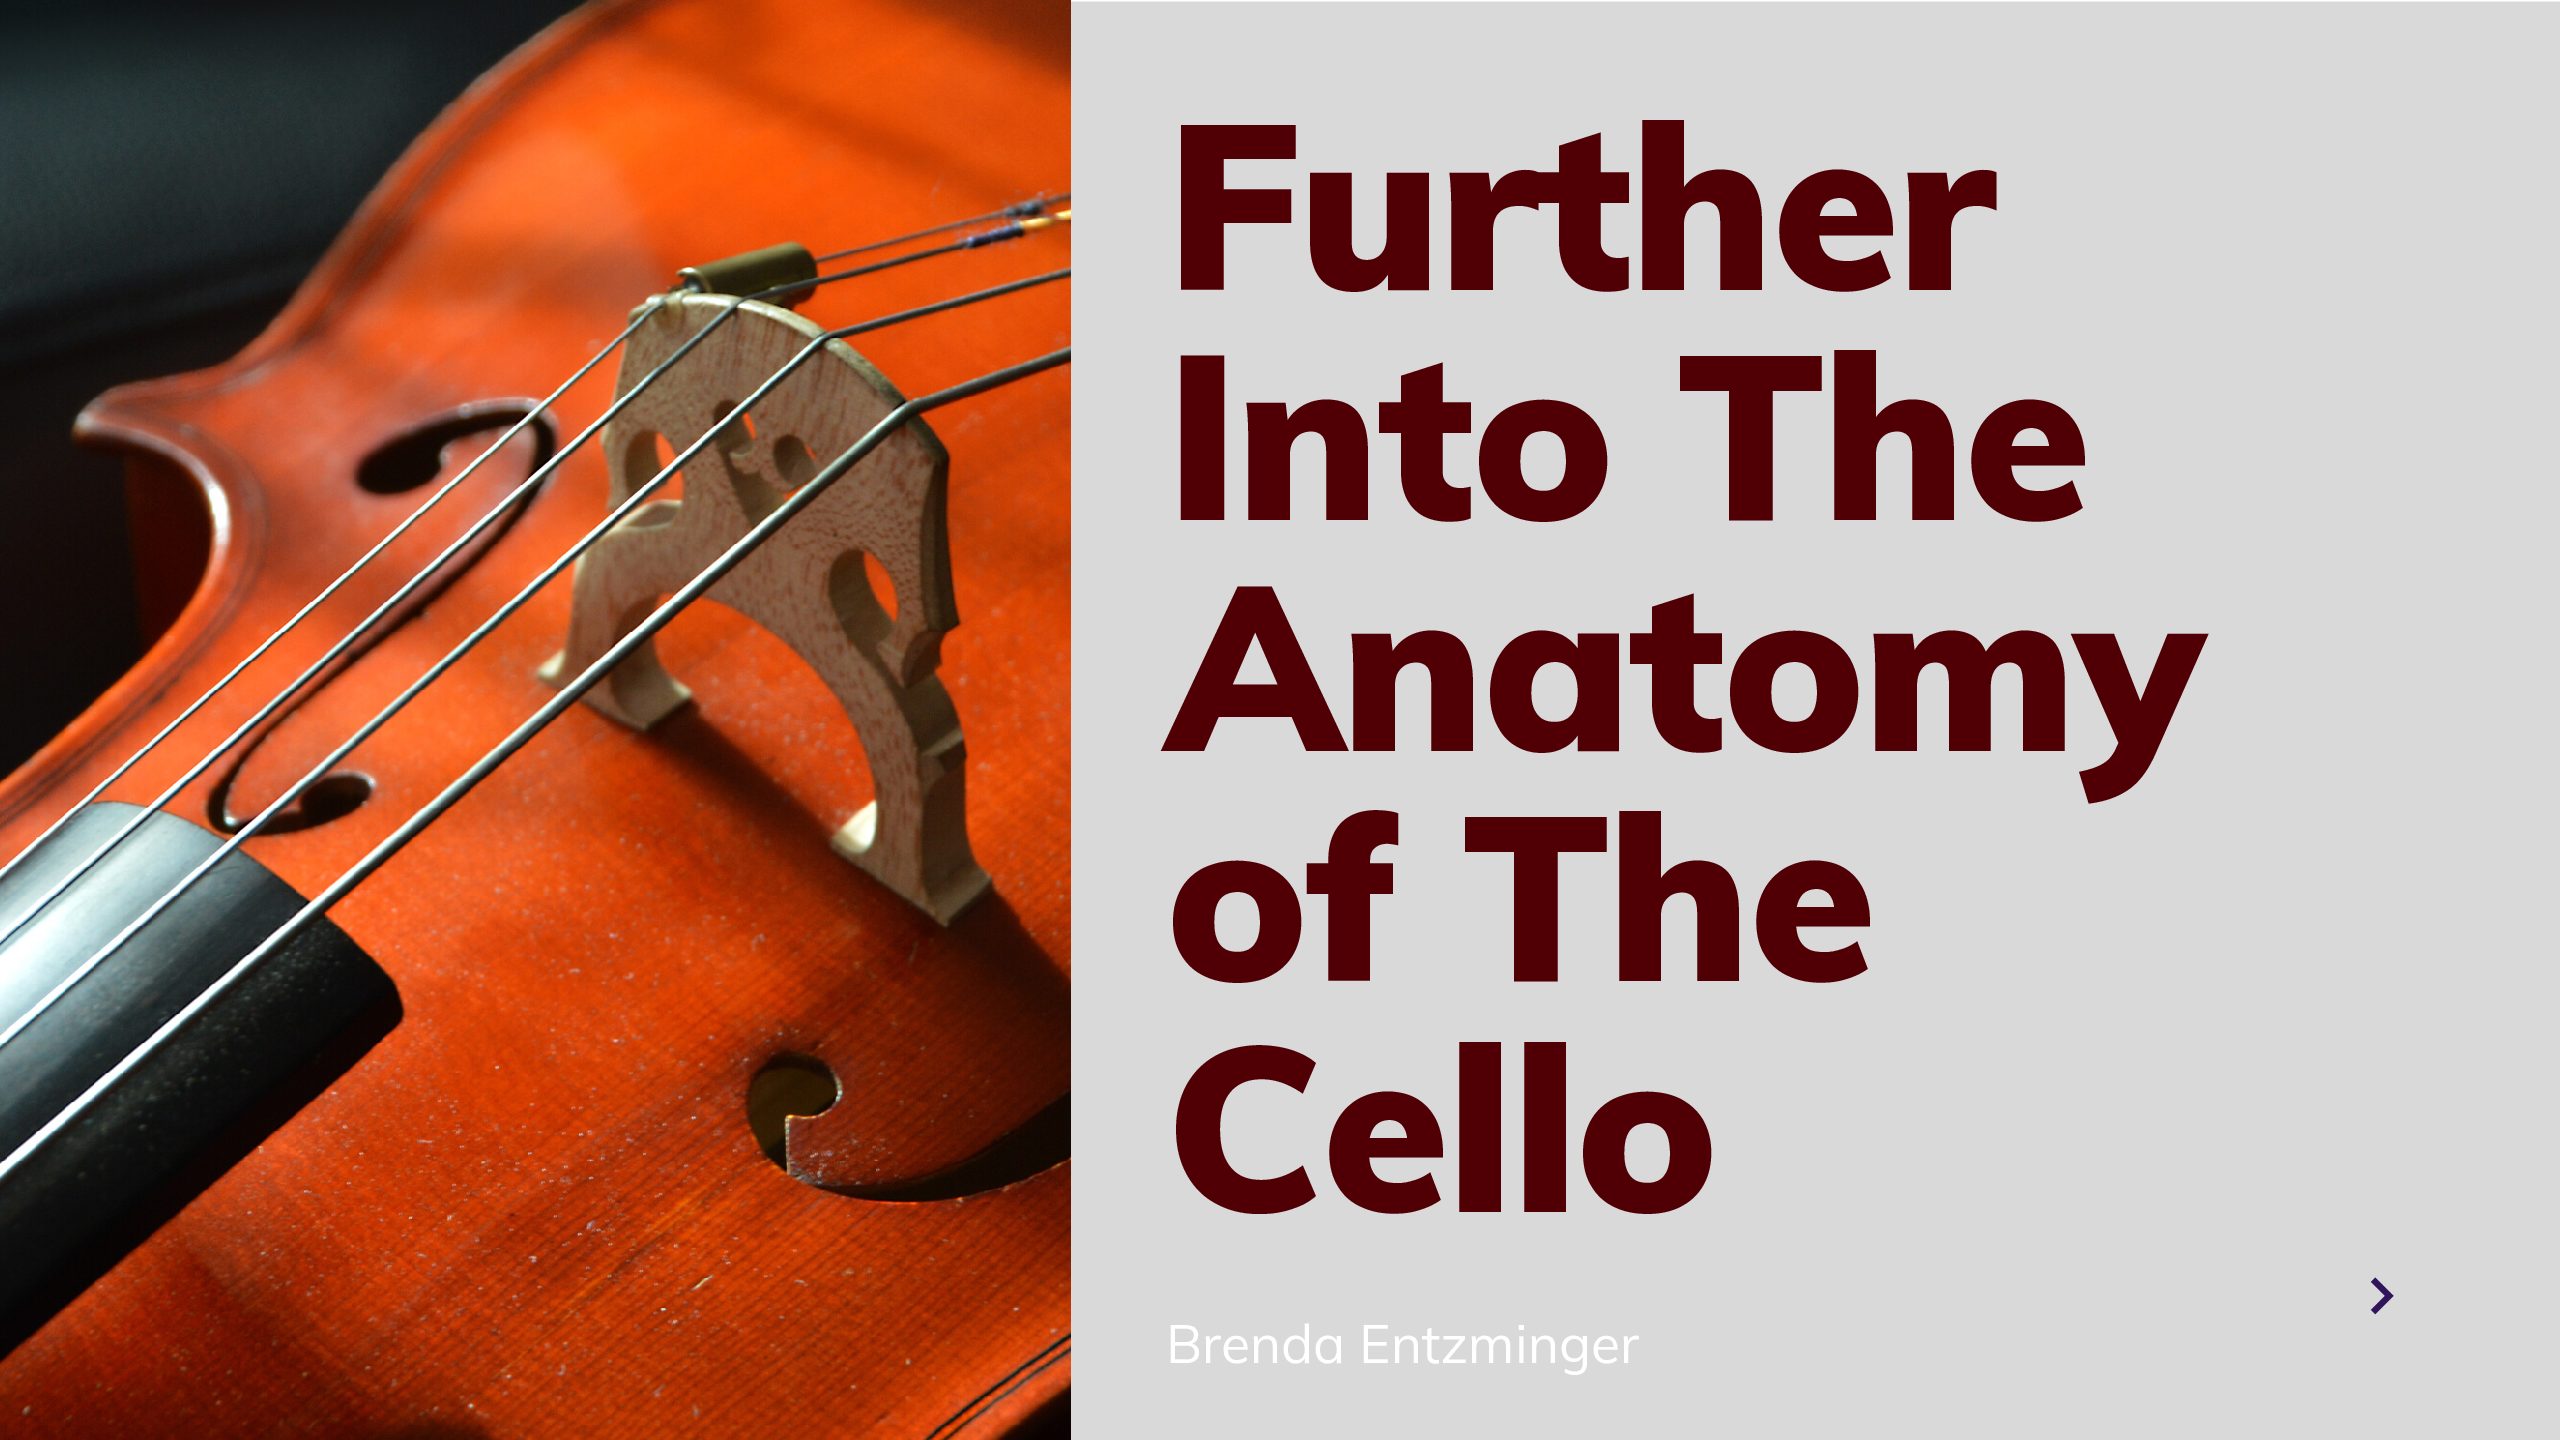 Further Into The Anatomy of The Cello